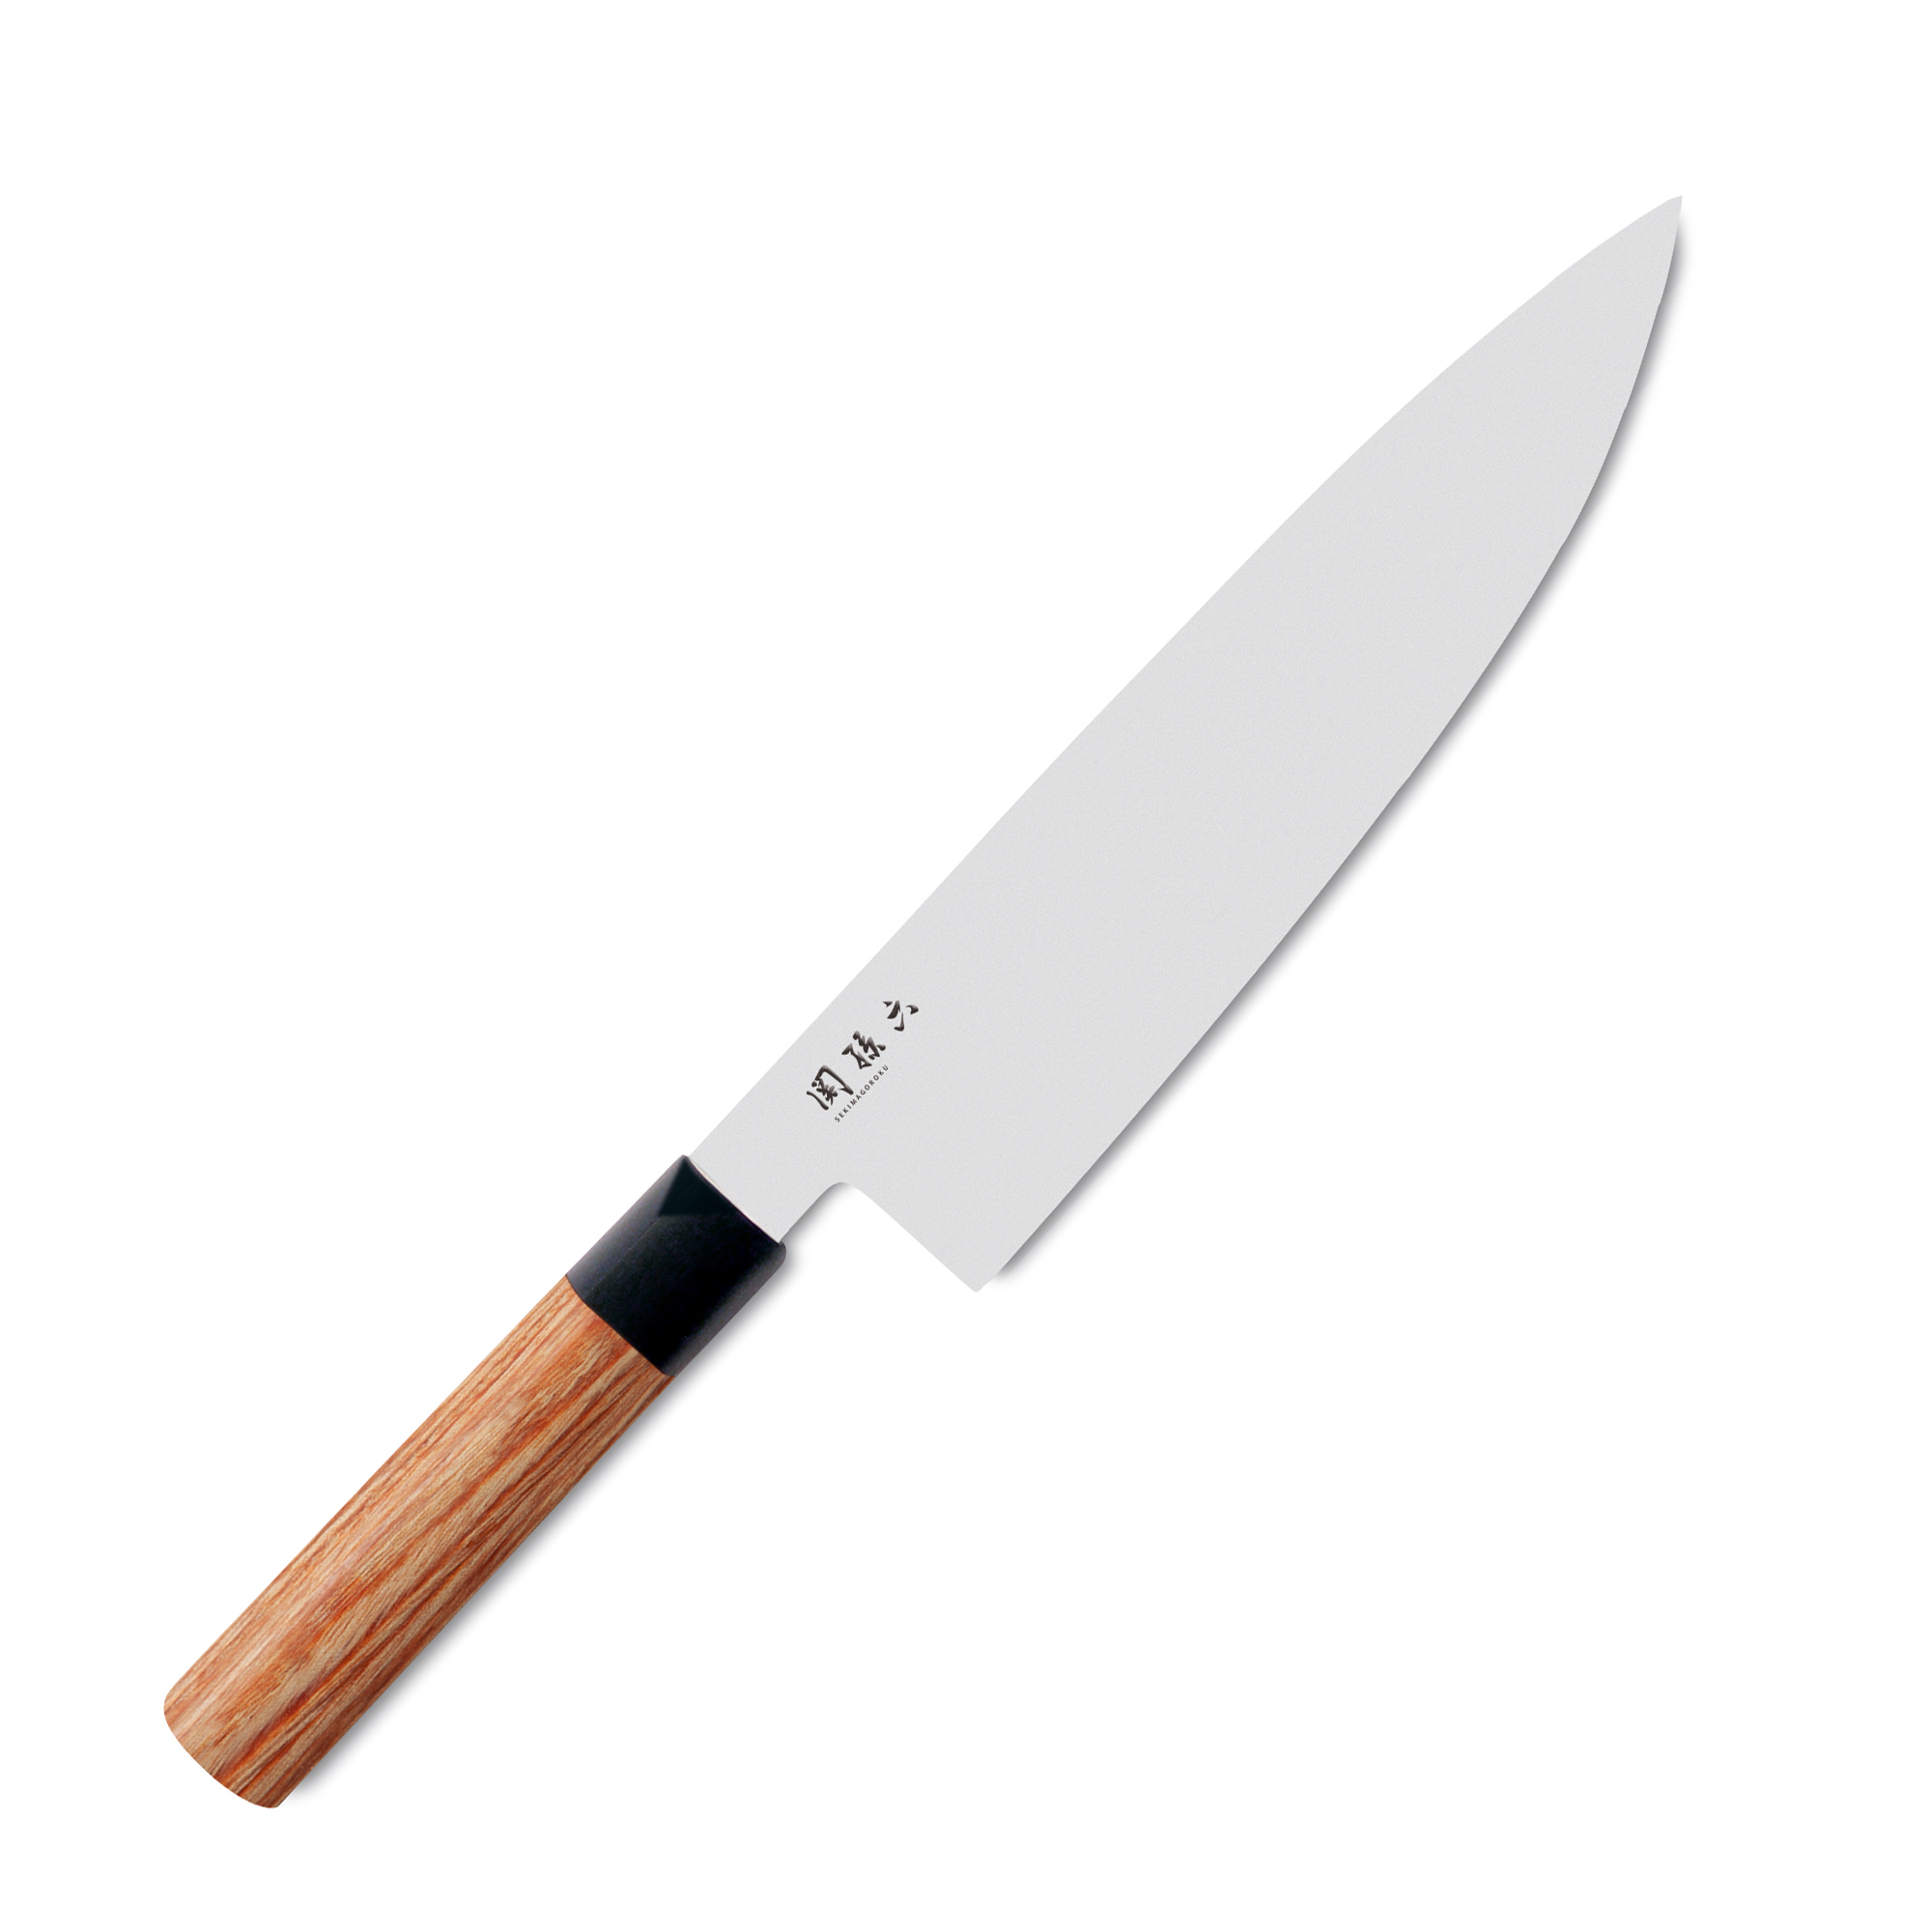 https://kyotoboutique.fr/17403/japanese-kitchen-knife-with-red-wooden-handle-for-cutting-meat-gyuto-seki-magoroku-20-cm.jpg